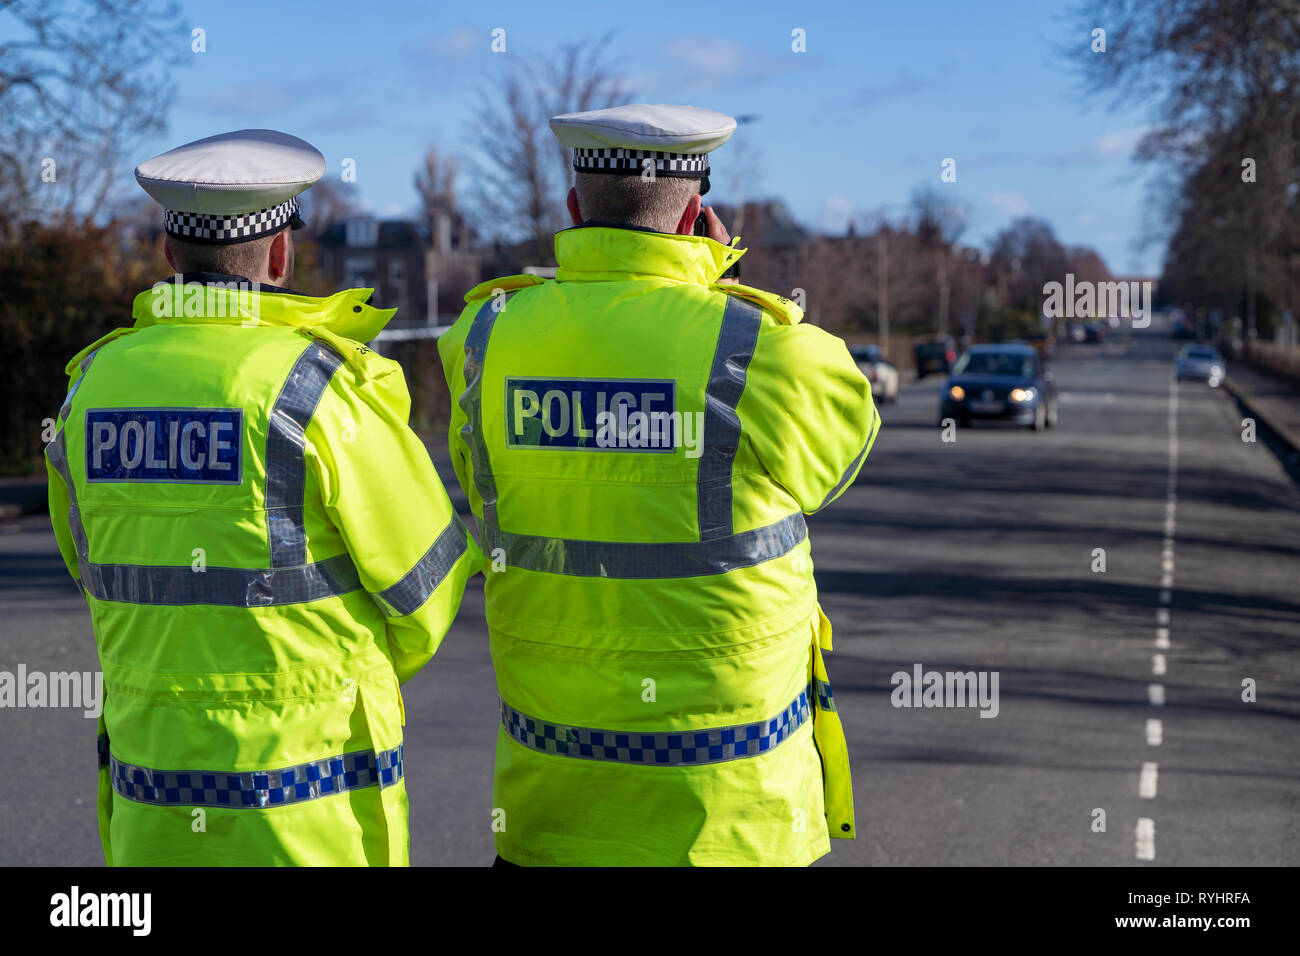 Edinburgh, Scotland, UK. 14 March, 2019. Police checking car speeds in Edinburgh at the first in a series of pilot 20mph ‘Roadside Education’ events, held in partnership with Police Scotland, aiming to raise awareness of the consequences of breaking 20mph speed limits. Speeding drivers will be stopped by Police Officers and offered a short driver education session in a Police Command Unit. Credit: Iain Masterton/Alamy Live News Stock Photo